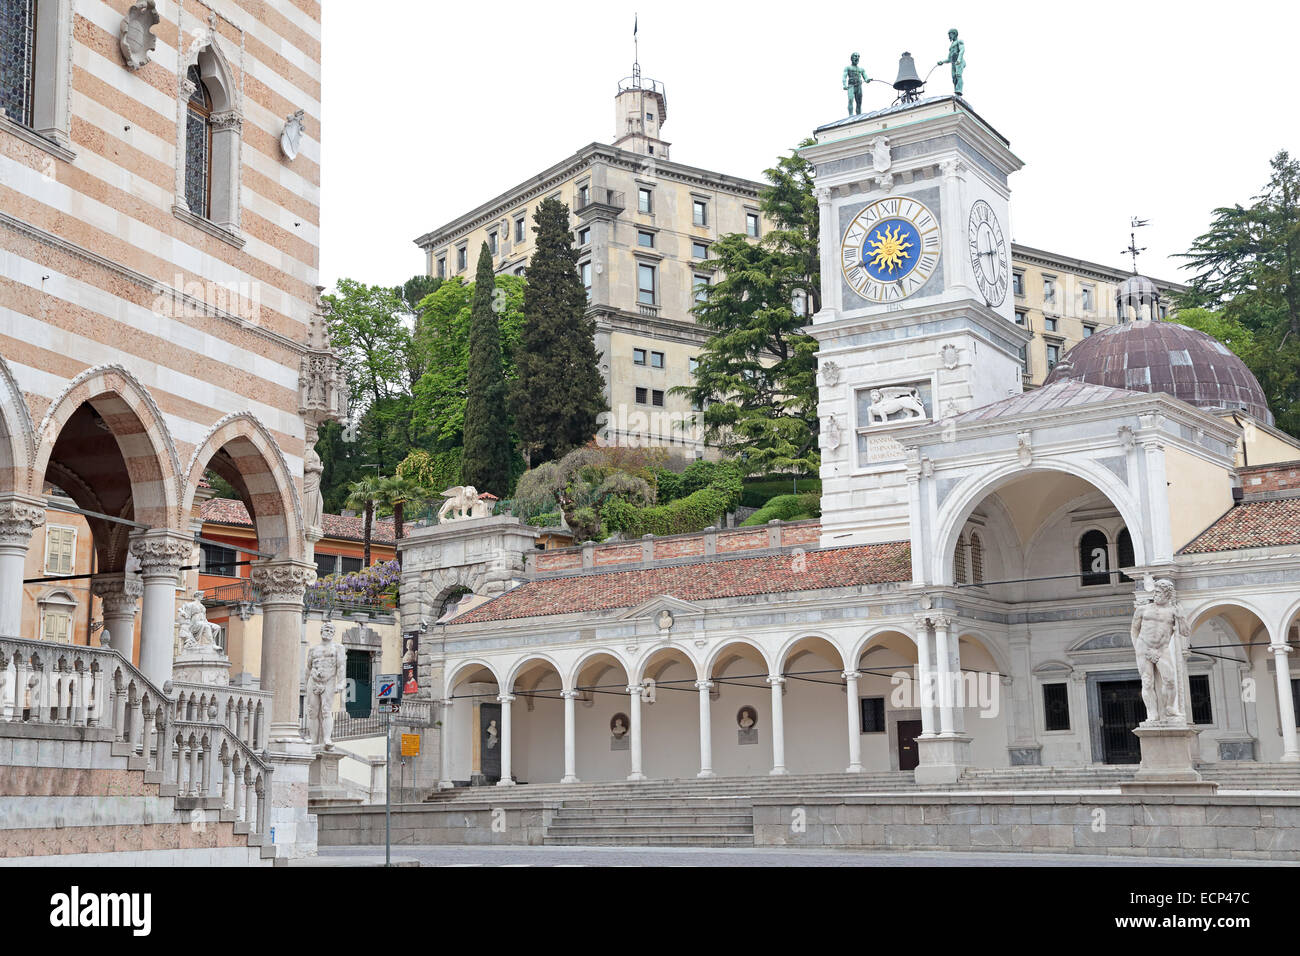 The ancient place of Freedom in Udine, Italy Stock Photo